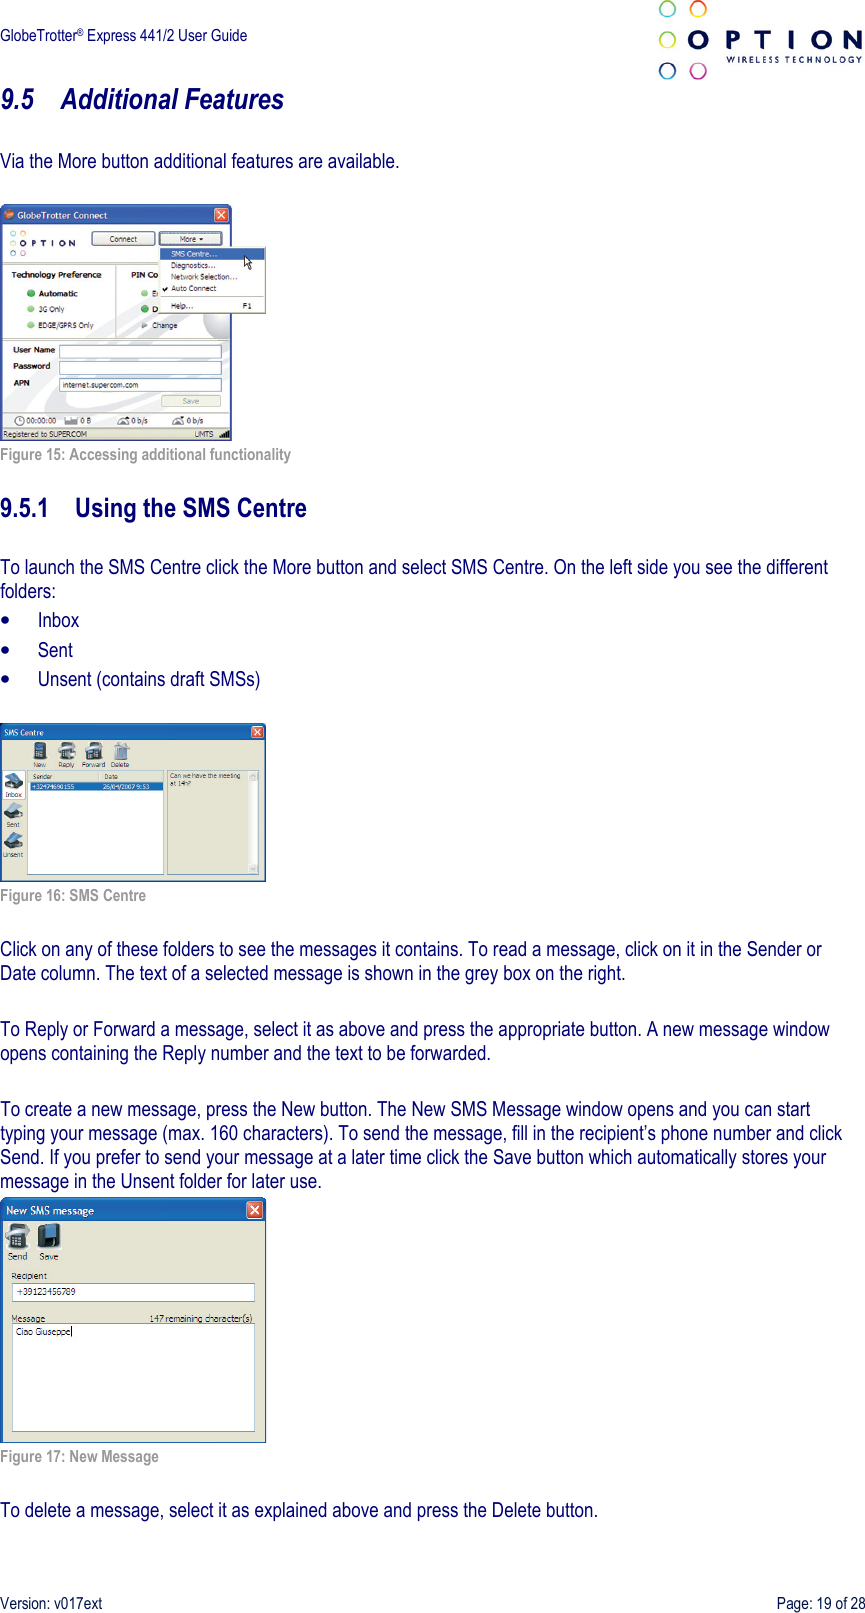  GlobeTrotter® Express 441/2 User Guide    Version: v017ext  Page: 19 of 28 9.5 Additional Features  Via the More button additional features are available.   Figure 15: Accessing additional functionality  9.5.1 Using the SMS Centre  To launch the SMS Centre click the More button and select SMS Centre. On the left side you see the different folders: • Inbox • Sent • Unsent (contains draft SMSs)   Figure 16: SMS Centre  Click on any of these folders to see the messages it contains. To read a message, click on it in the Sender or Date column. The text of a selected message is shown in the grey box on the right.  To Reply or Forward a message, select it as above and press the appropriate button. A new message window opens containing the Reply number and the text to be forwarded.  To create a new message, press the New button. The New SMS Message window opens and you can start typing your message (max. 160 characters). To send the message, fill in the recipient’s phone number and click Send. If you prefer to send your message at a later time click the Save button which automatically stores your message in the Unsent folder for later use.  Figure 17: New Message  To delete a message, select it as explained above and press the Delete button. 